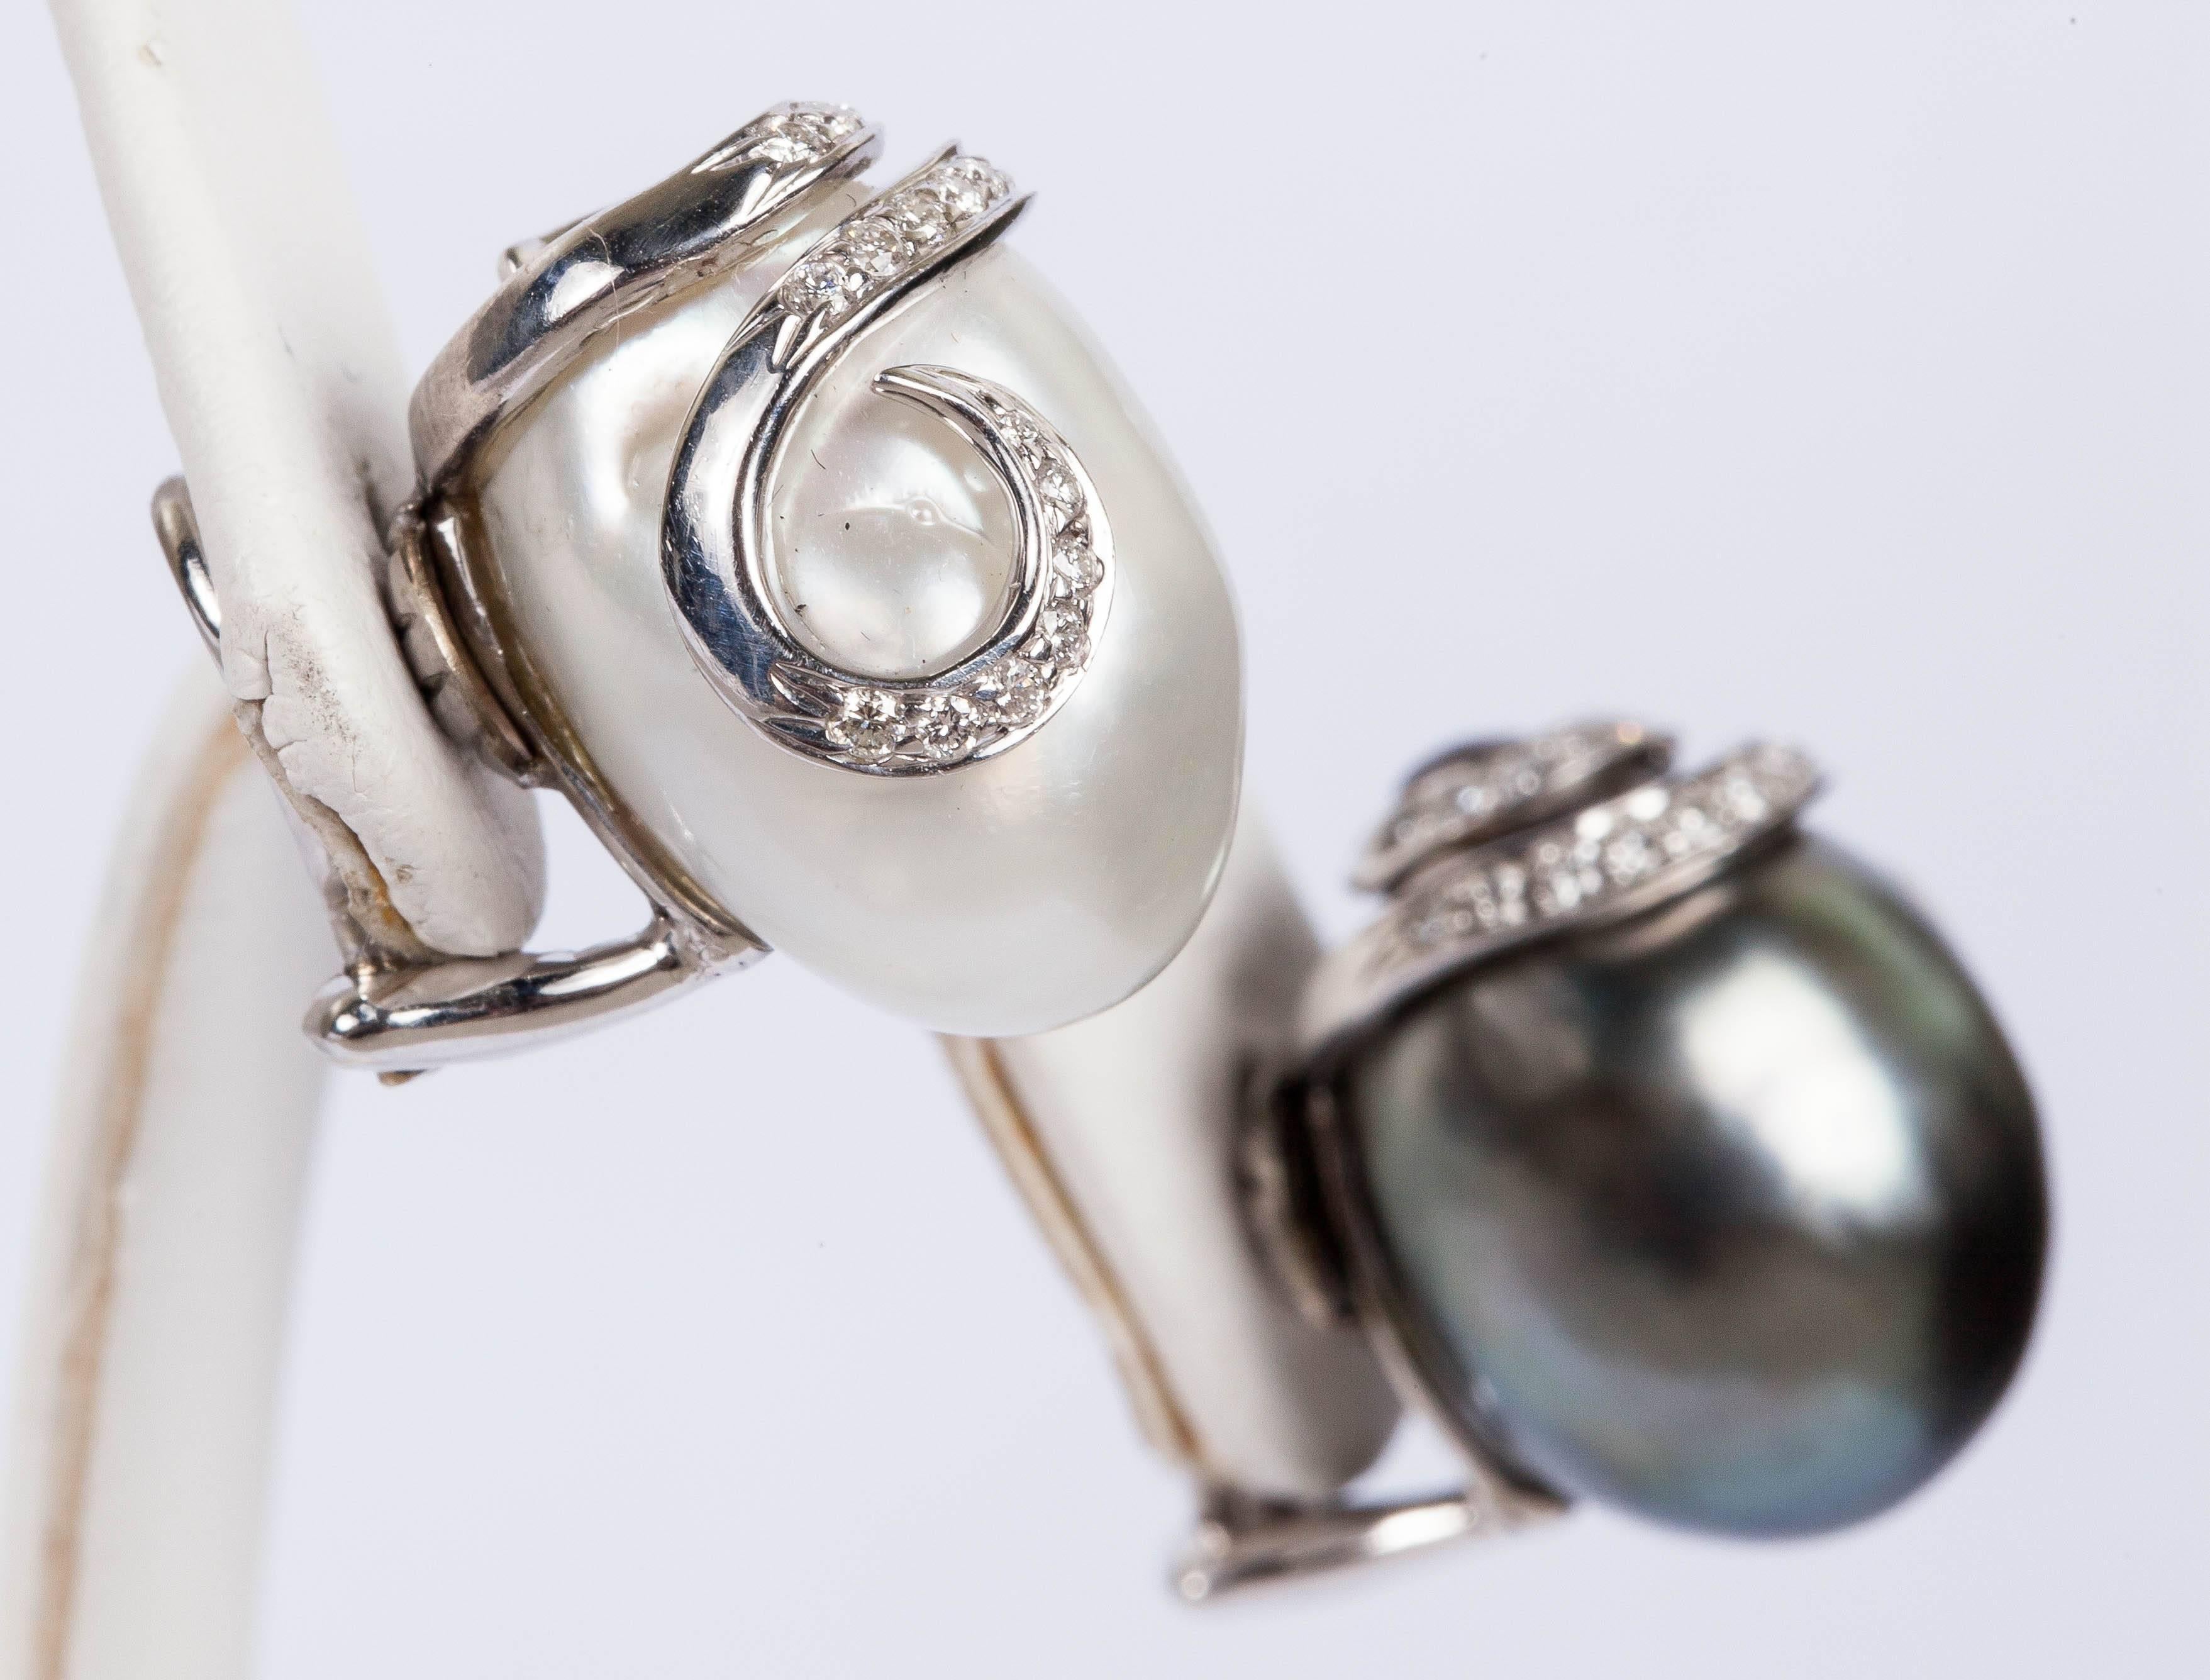 18K white gold clip on earrings with a 17x13mm white South Sea pearl and a 17x13mm Tahitian Baroque pearl. There is a swirl design of 18K white gold with approx. 0.30ct  pave set white diamonds adorning the pearls.